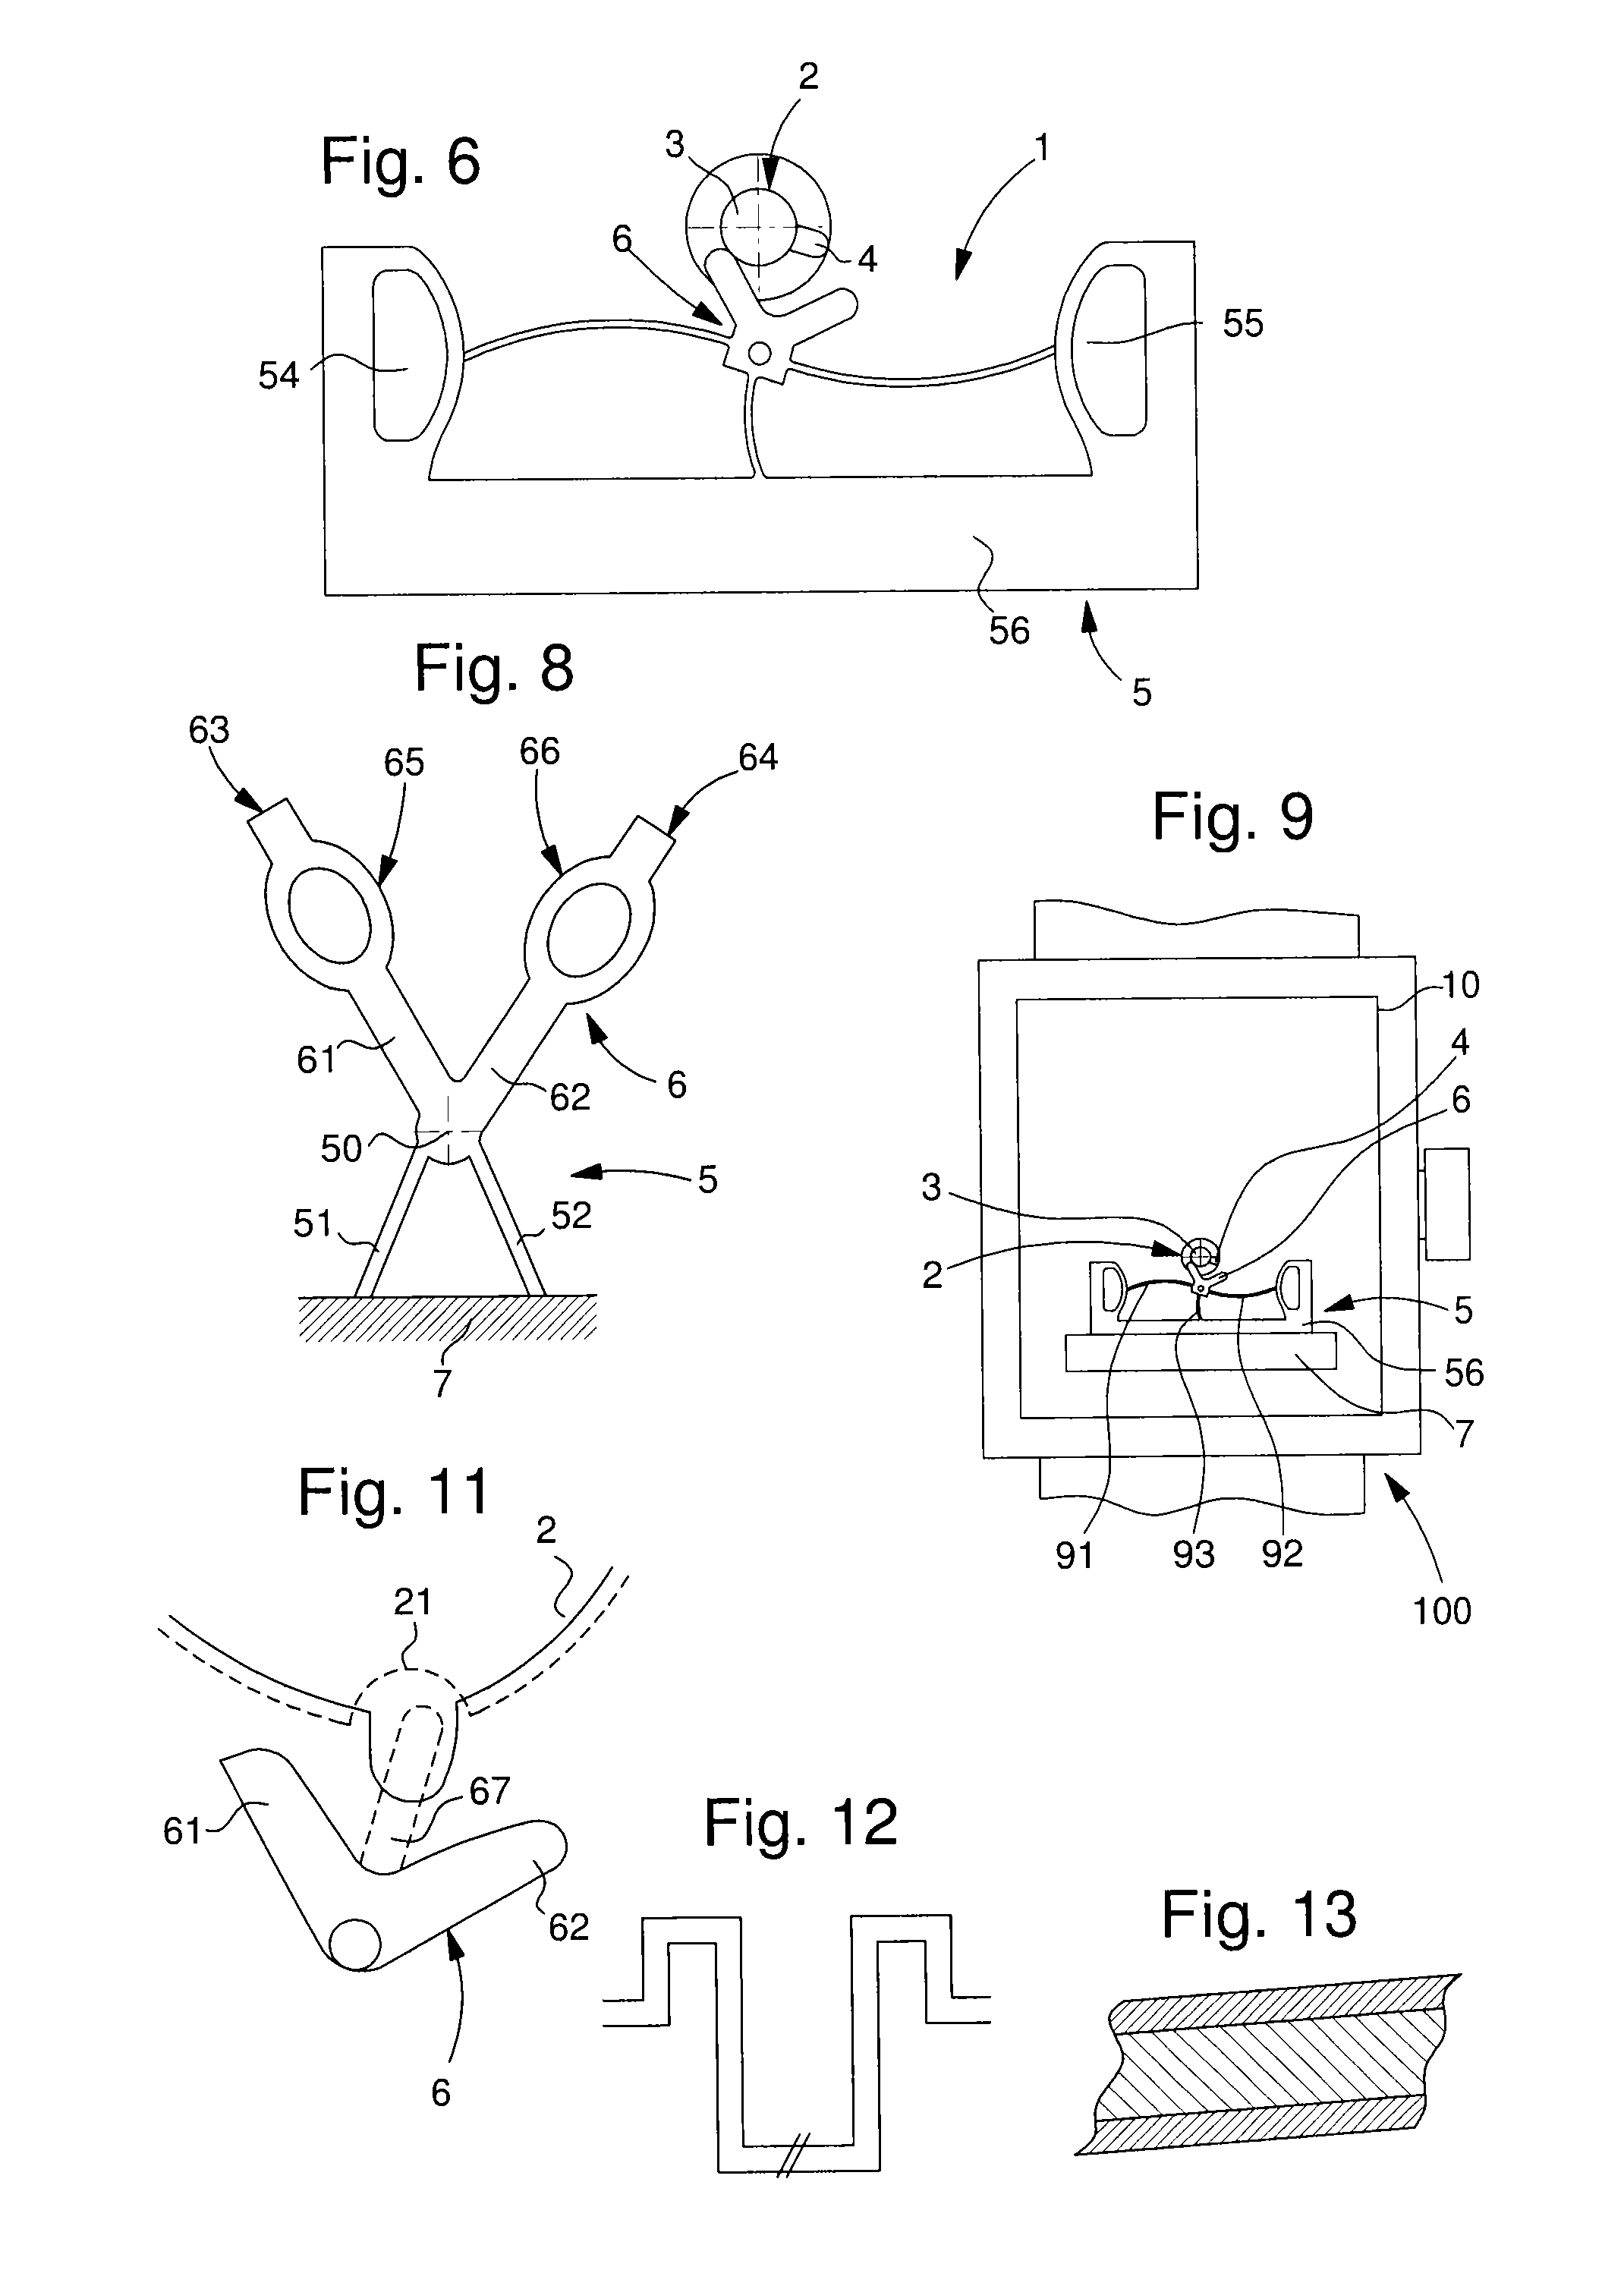 Method for creating a flexible, multistable element